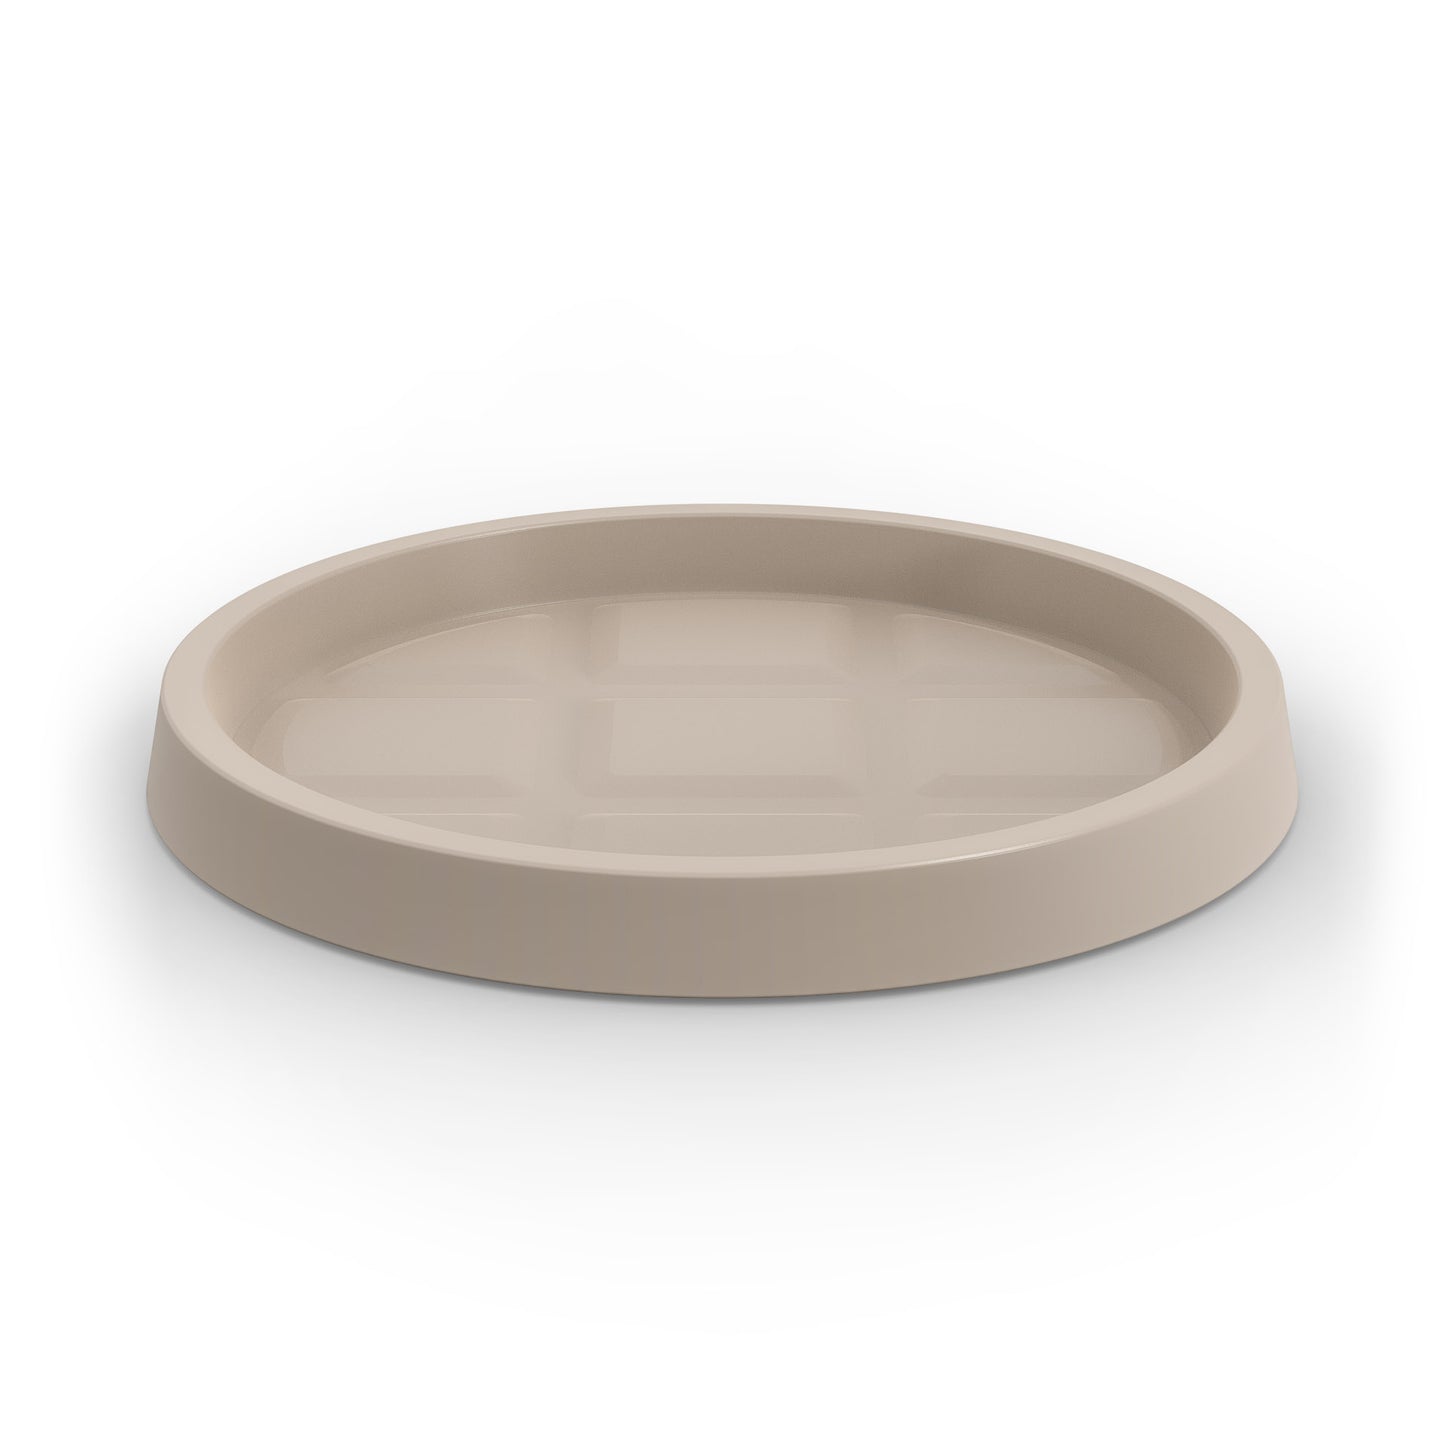 A sand stone saucer for Modscene planters. NZ made.